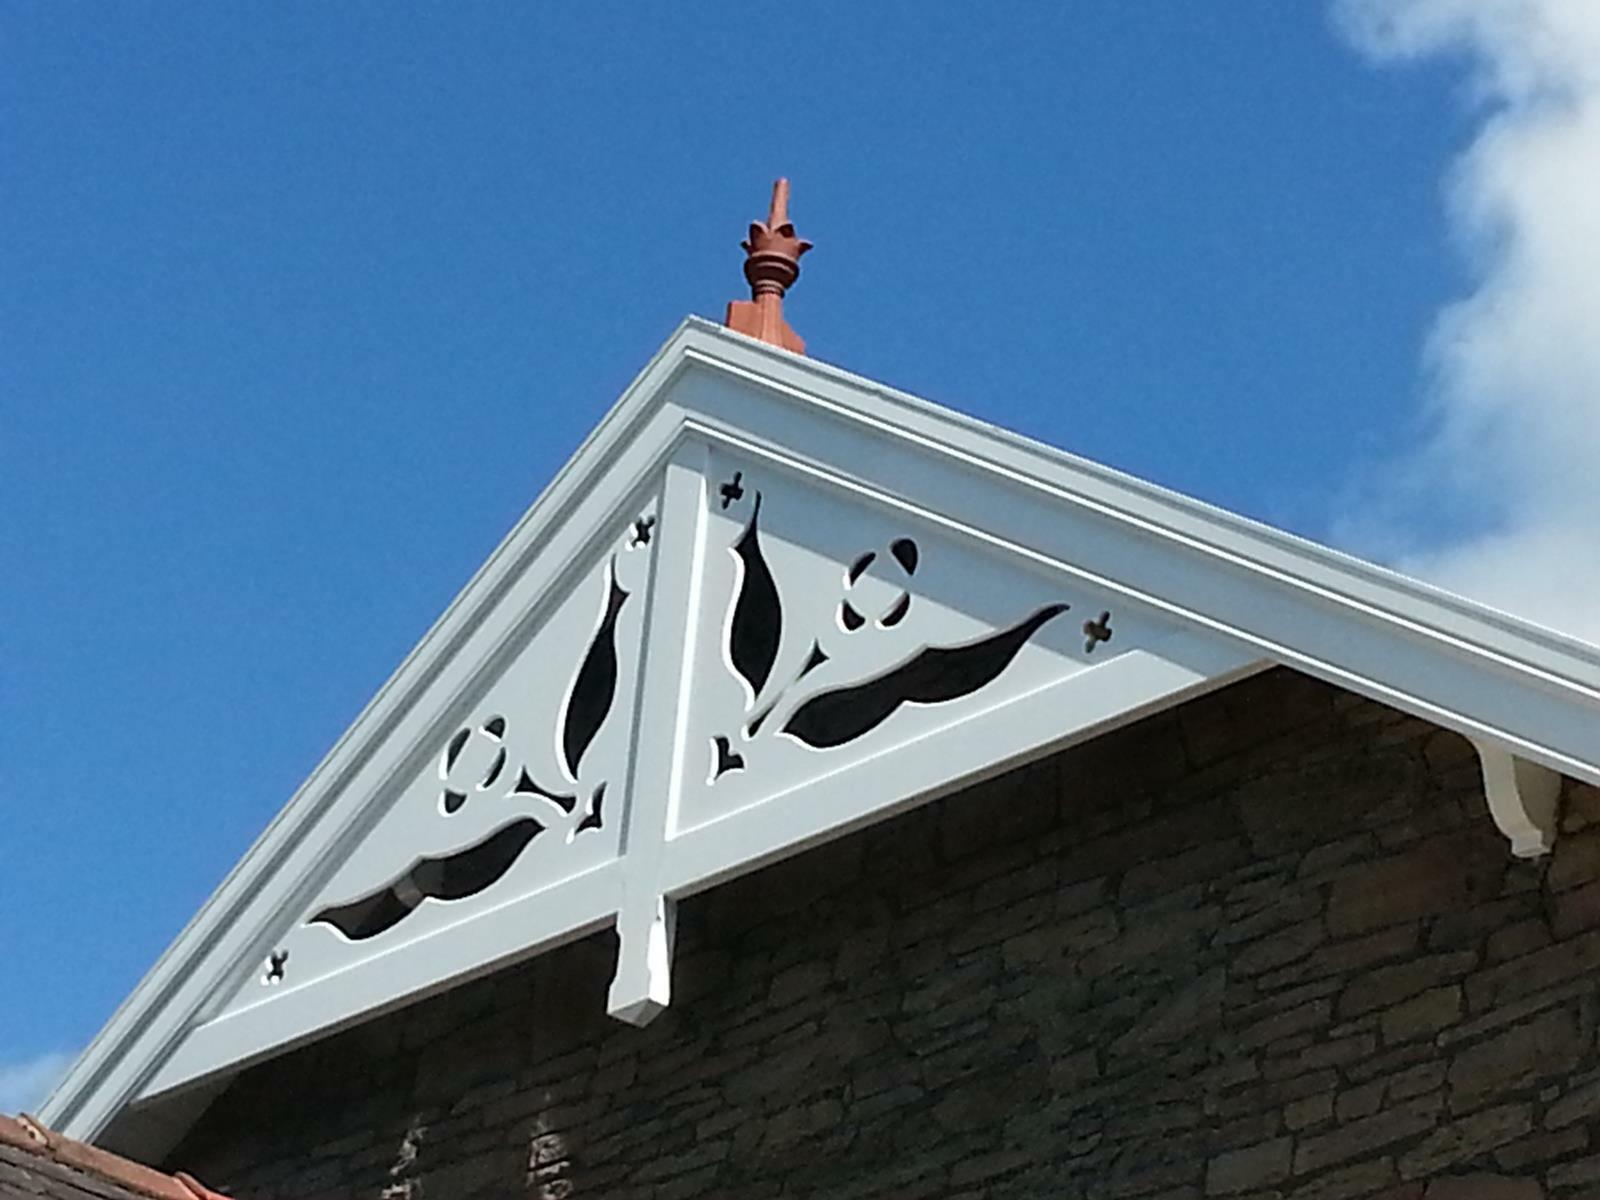 Crown roof finials installed on the roof